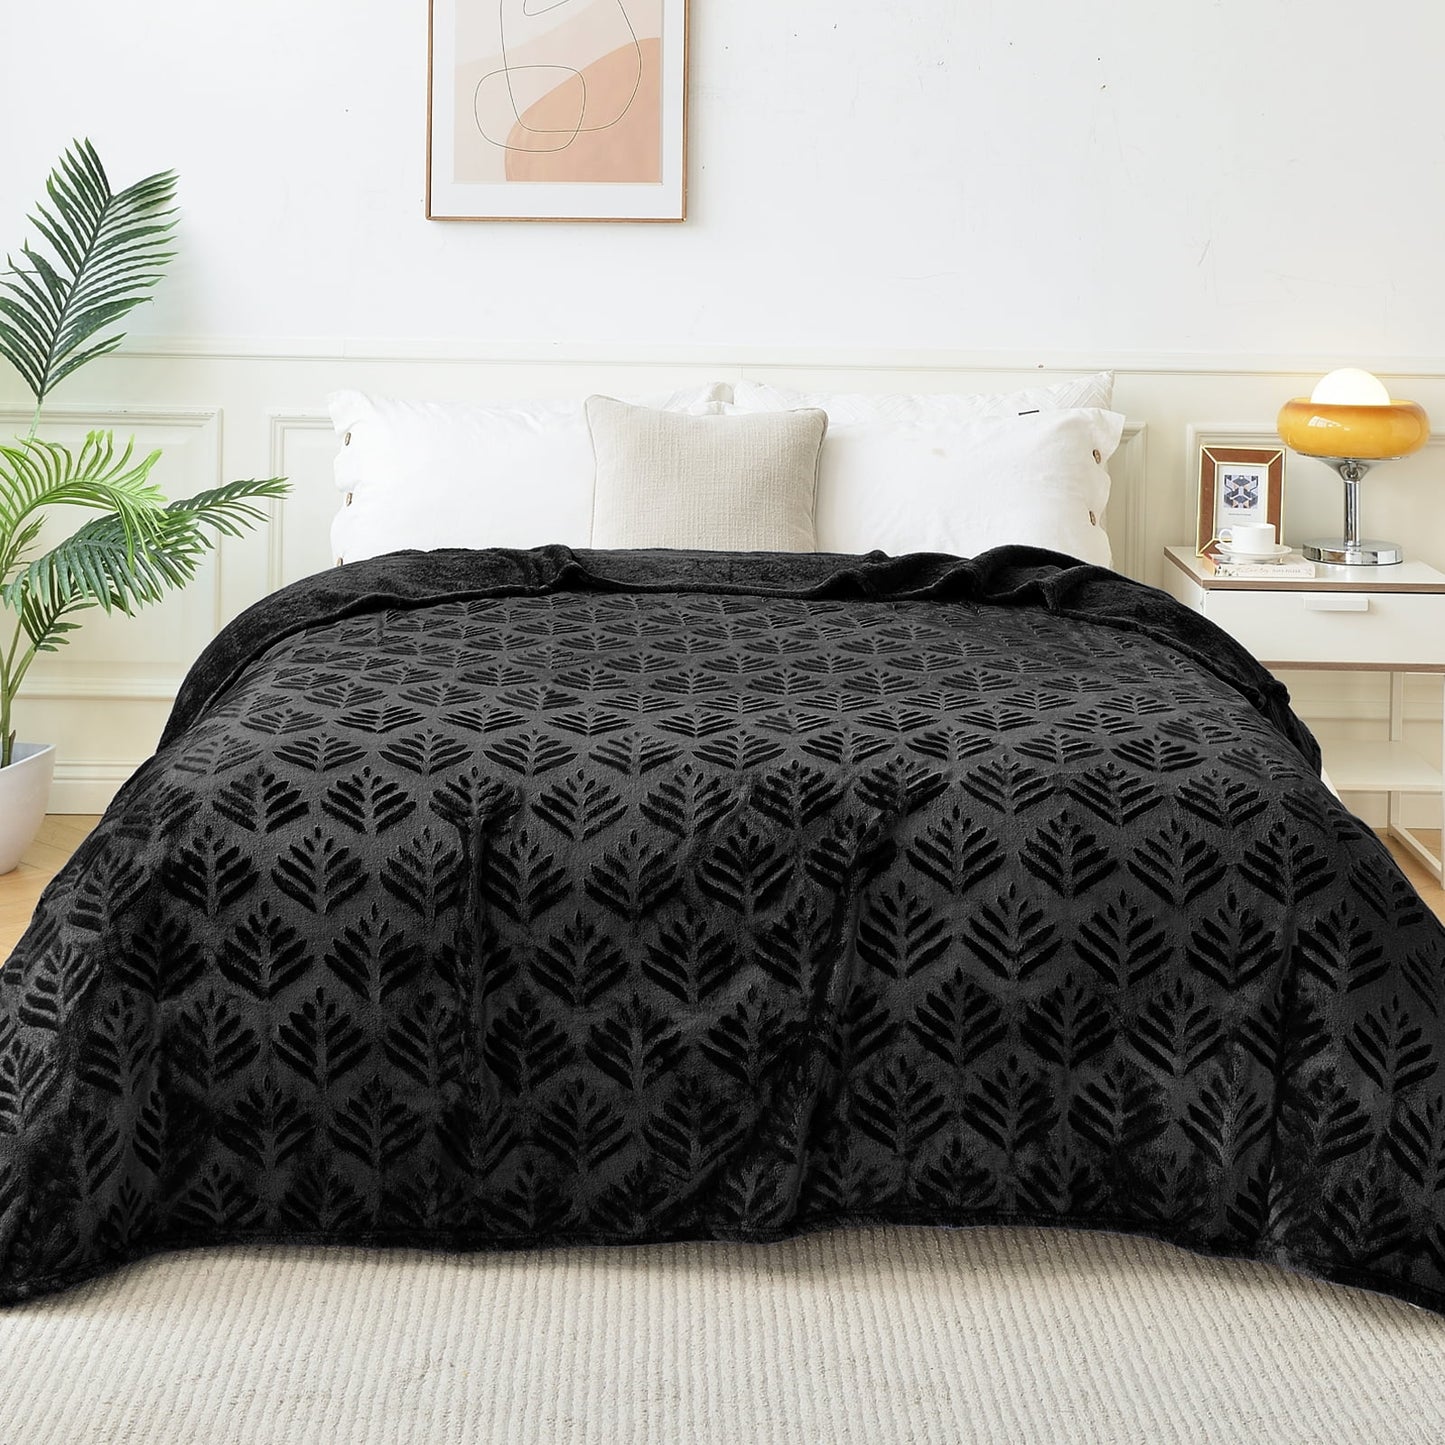 Exclusivo Mezcla Queen size Fleece Blanket for Bed, Super Soft and Warm Black Blankets for All Seasons, Plush Fuzzy and Thick Flannel Fleece Bed Blanket, 90x90 Inch